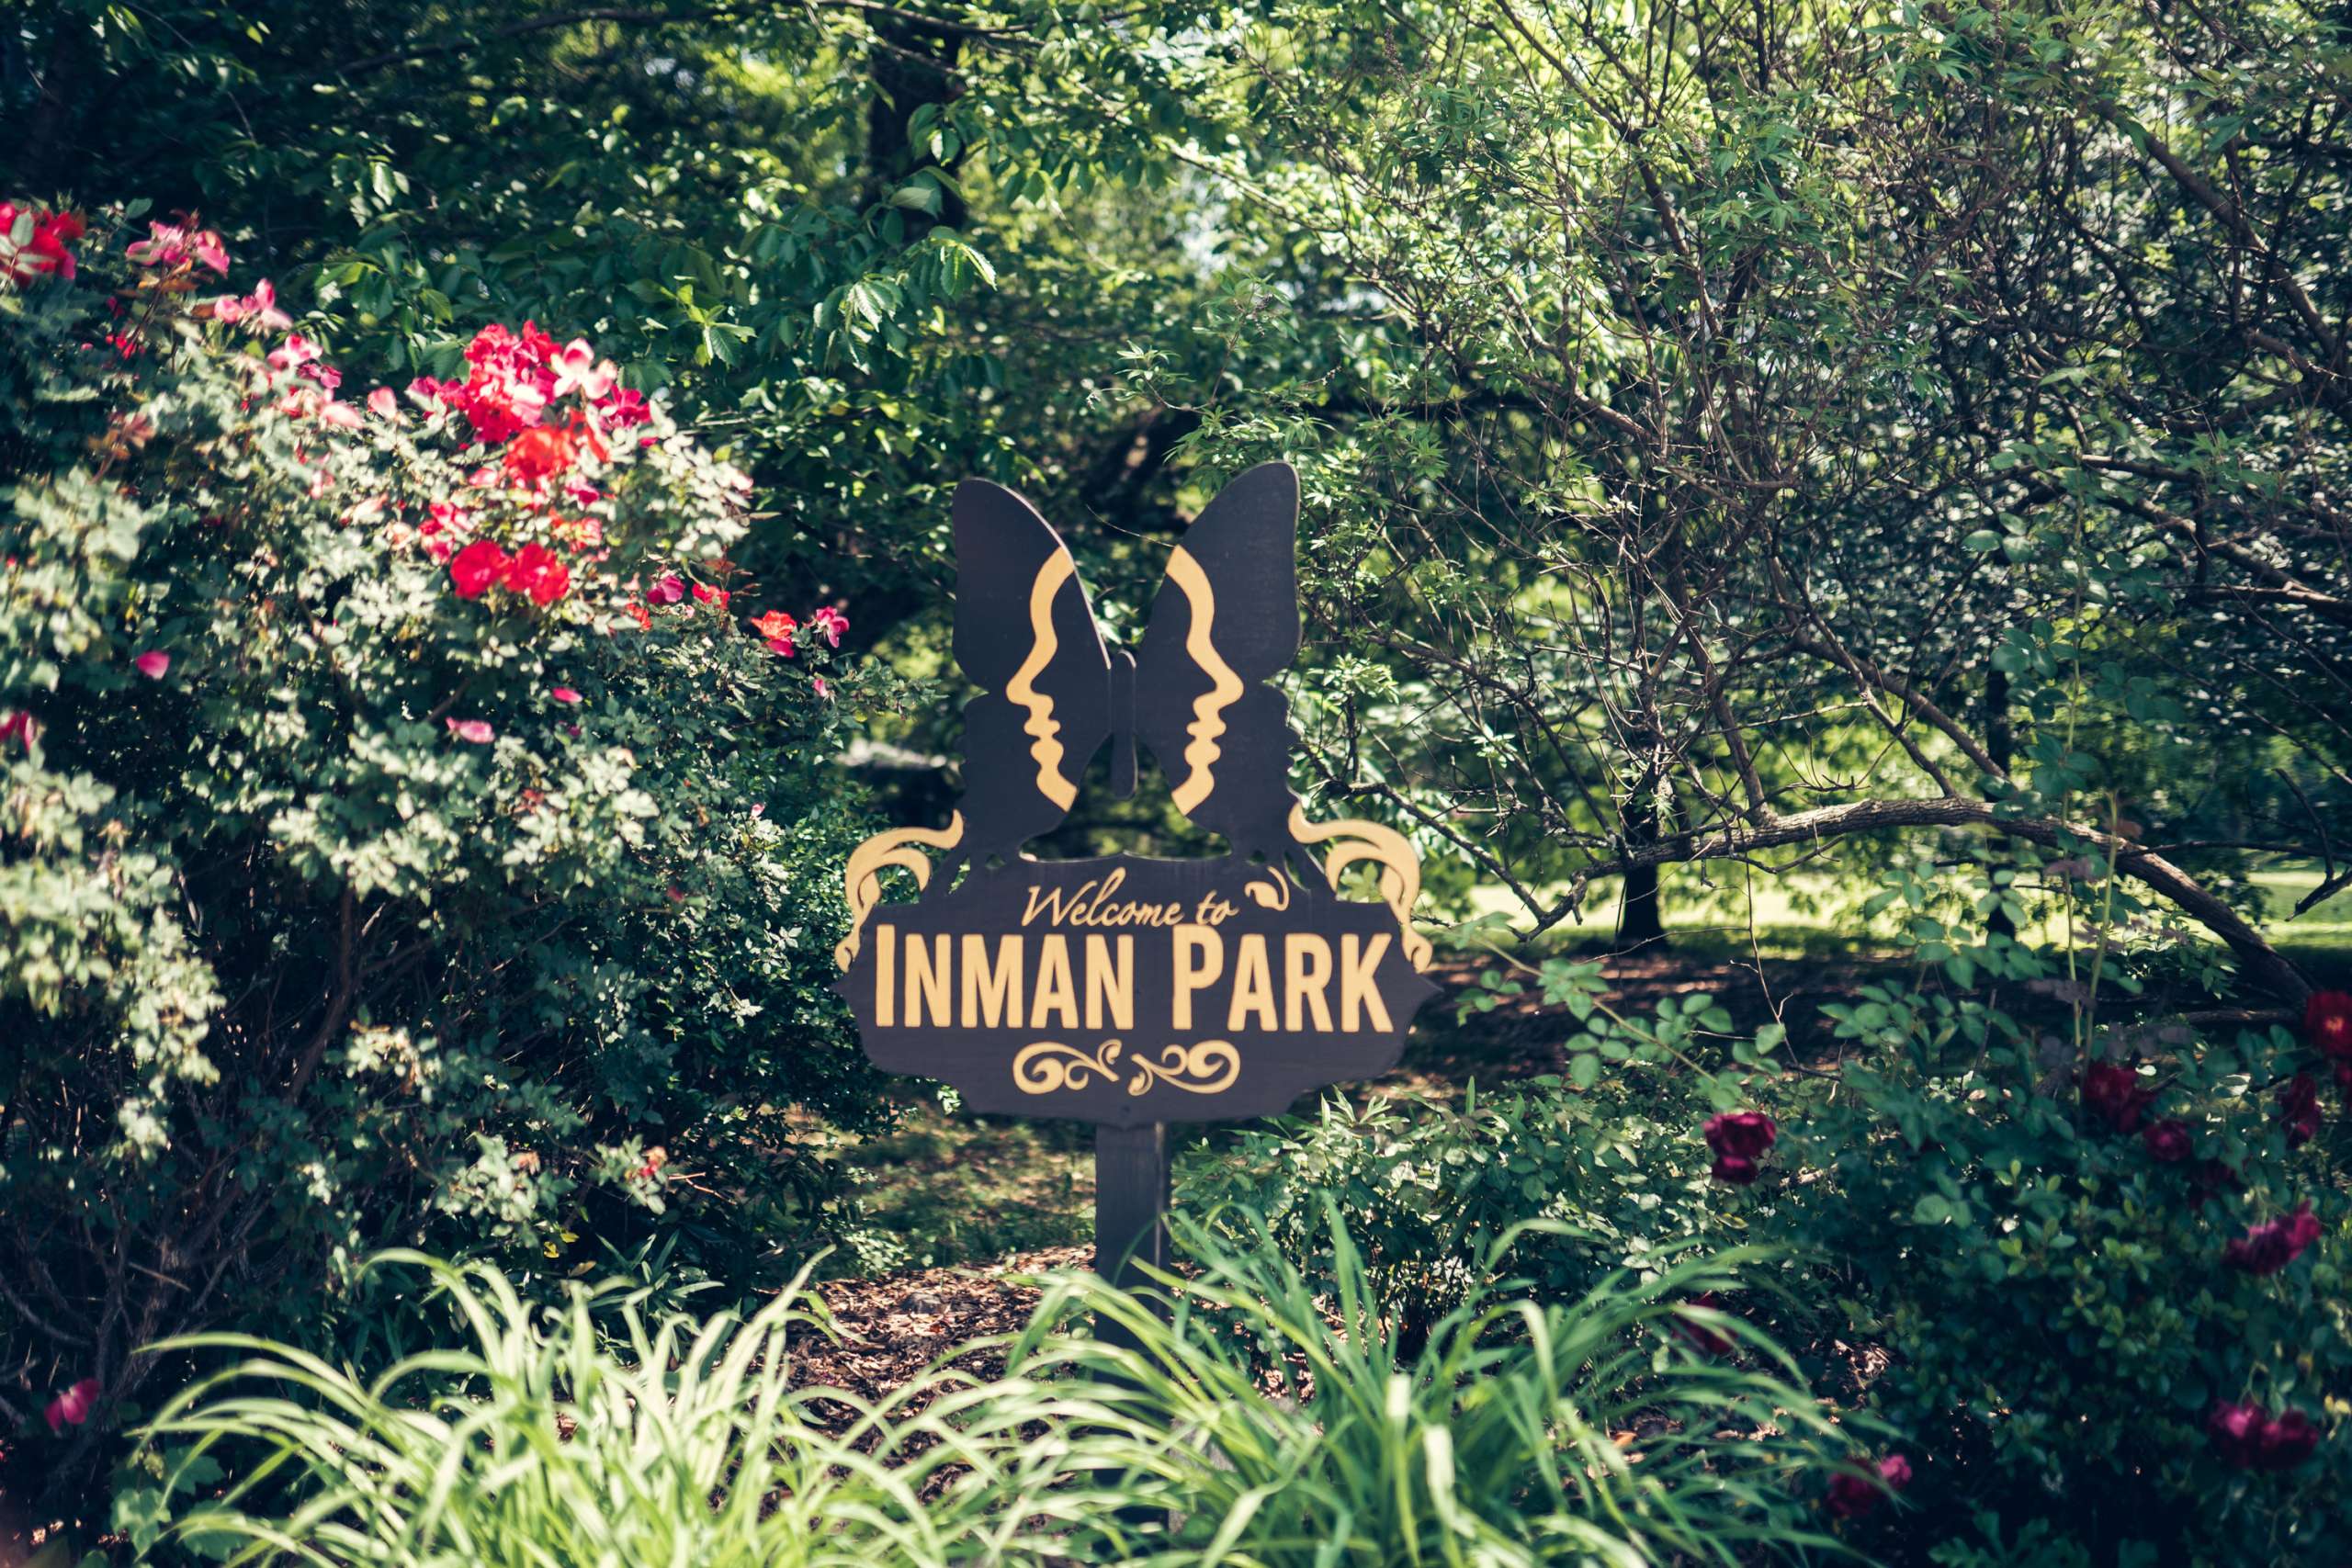 Inman Park welcome sign.